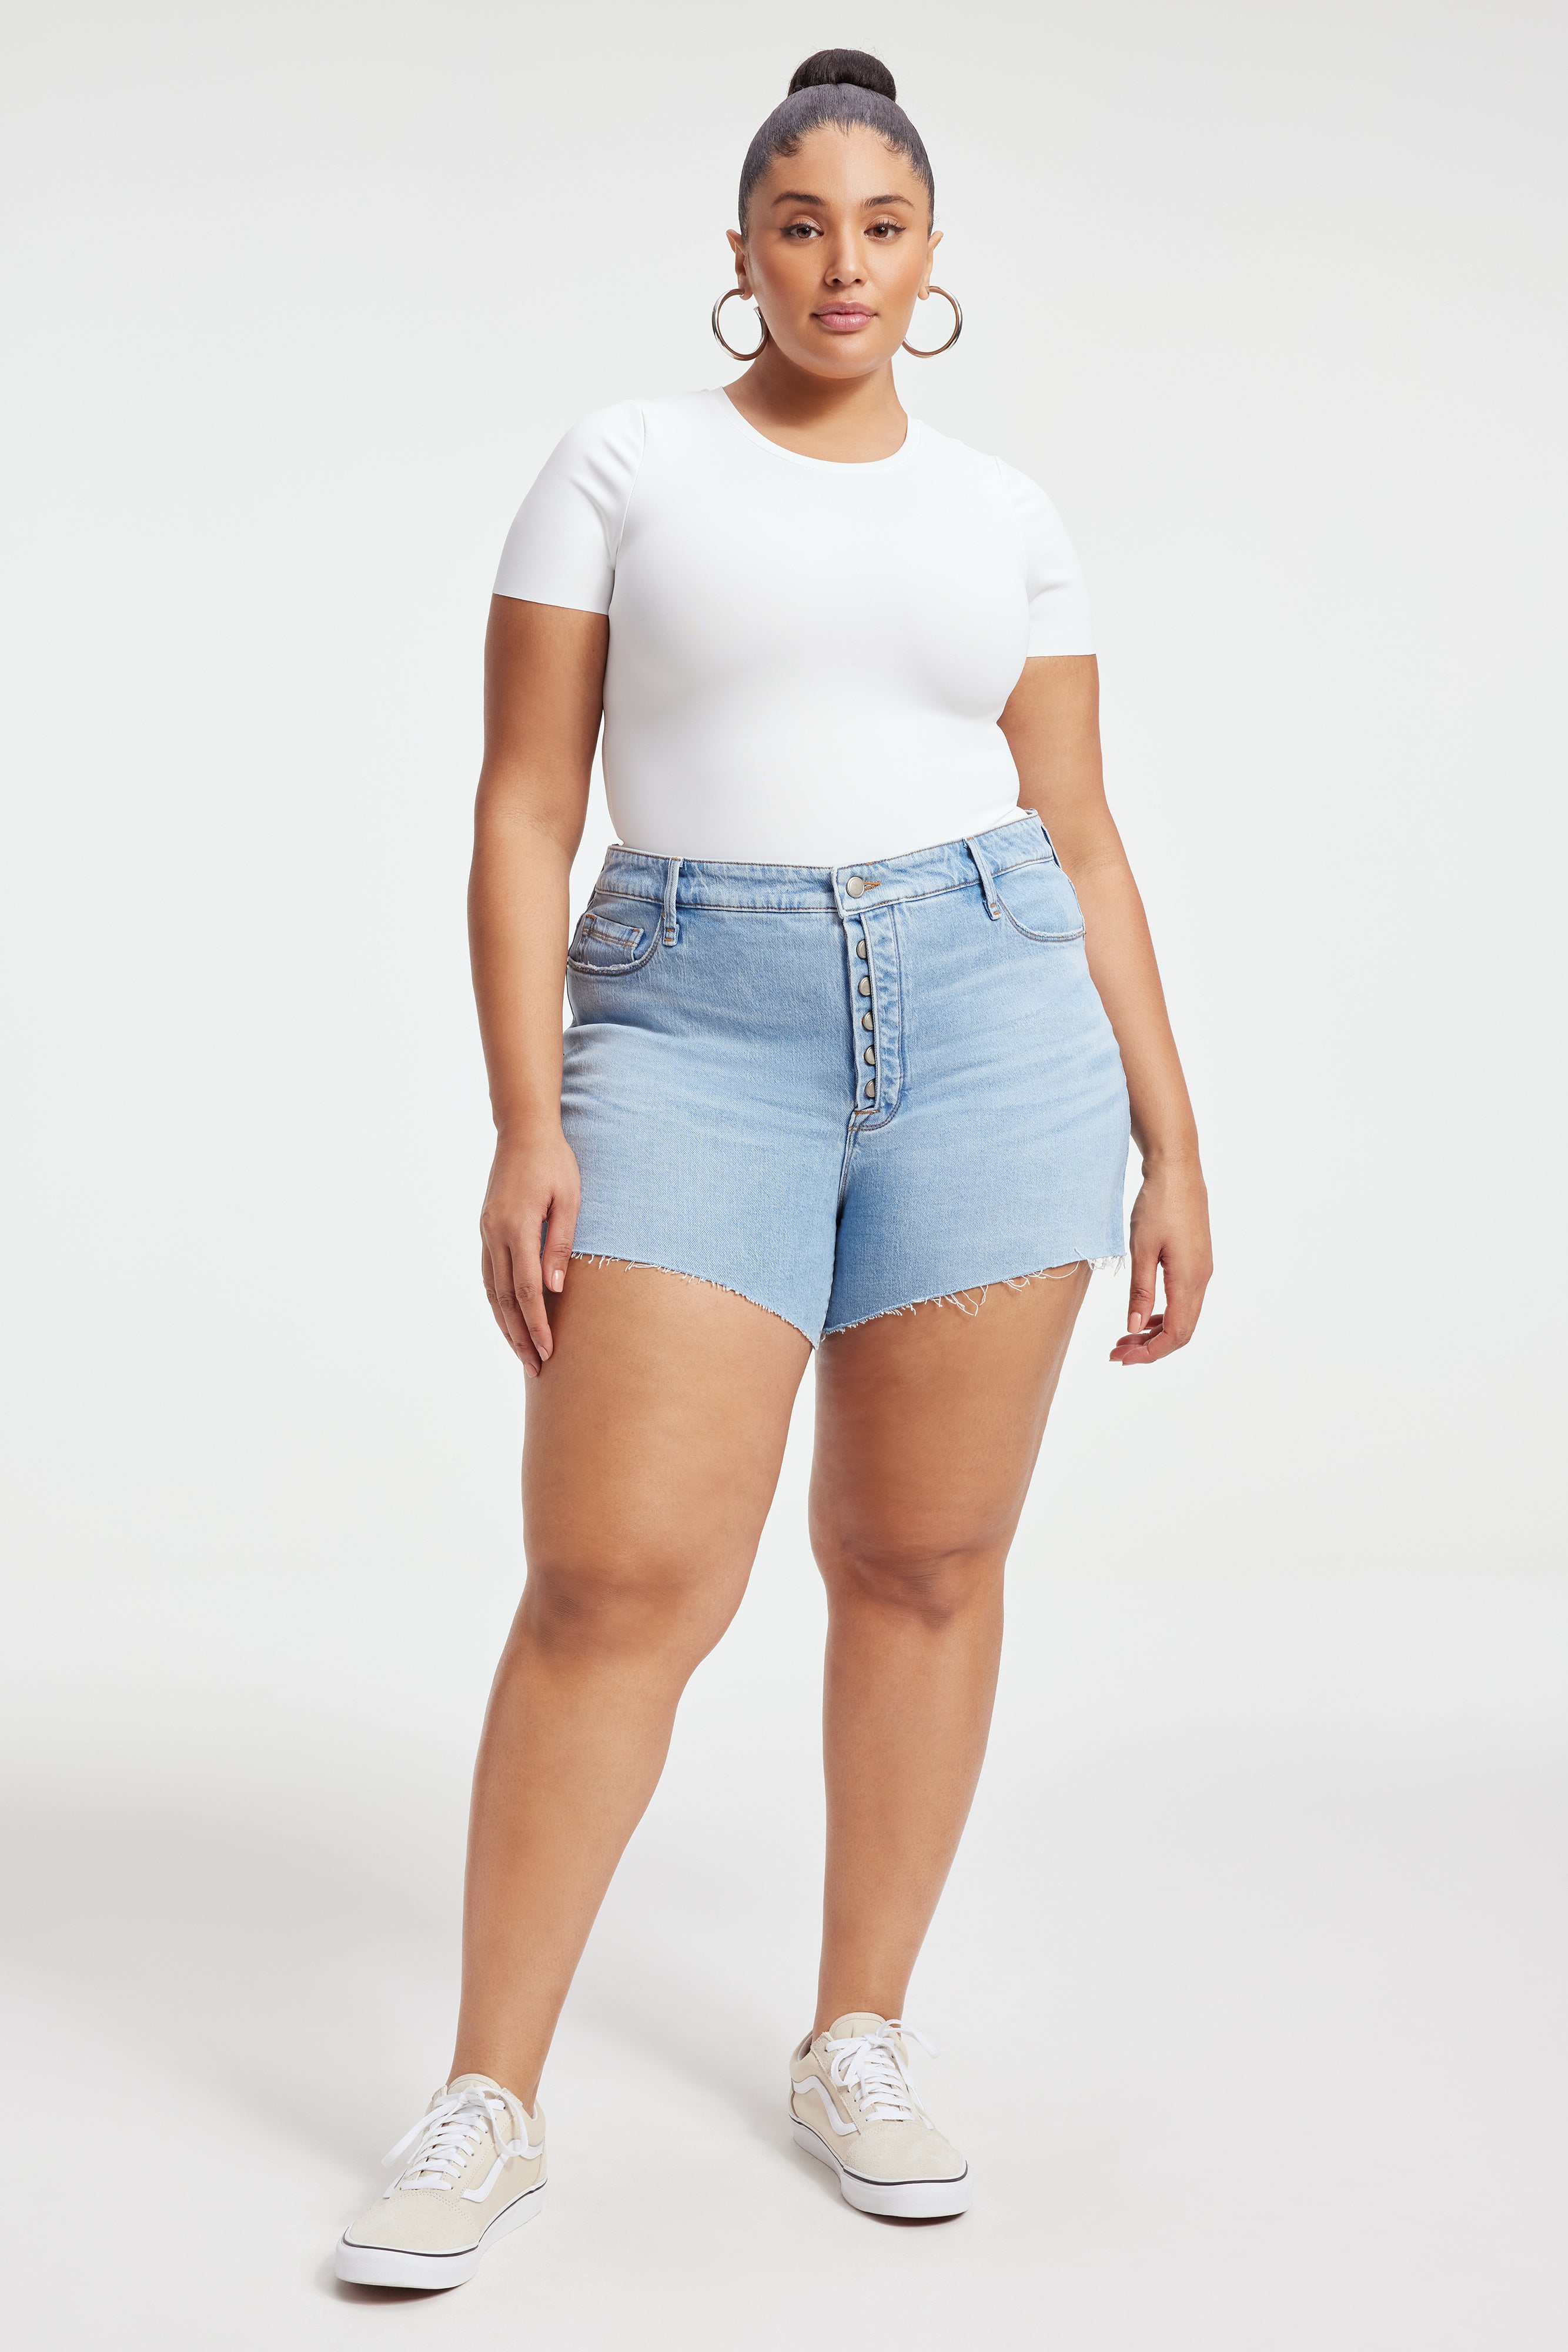 Details more than 71 denim shorts for thick thighs